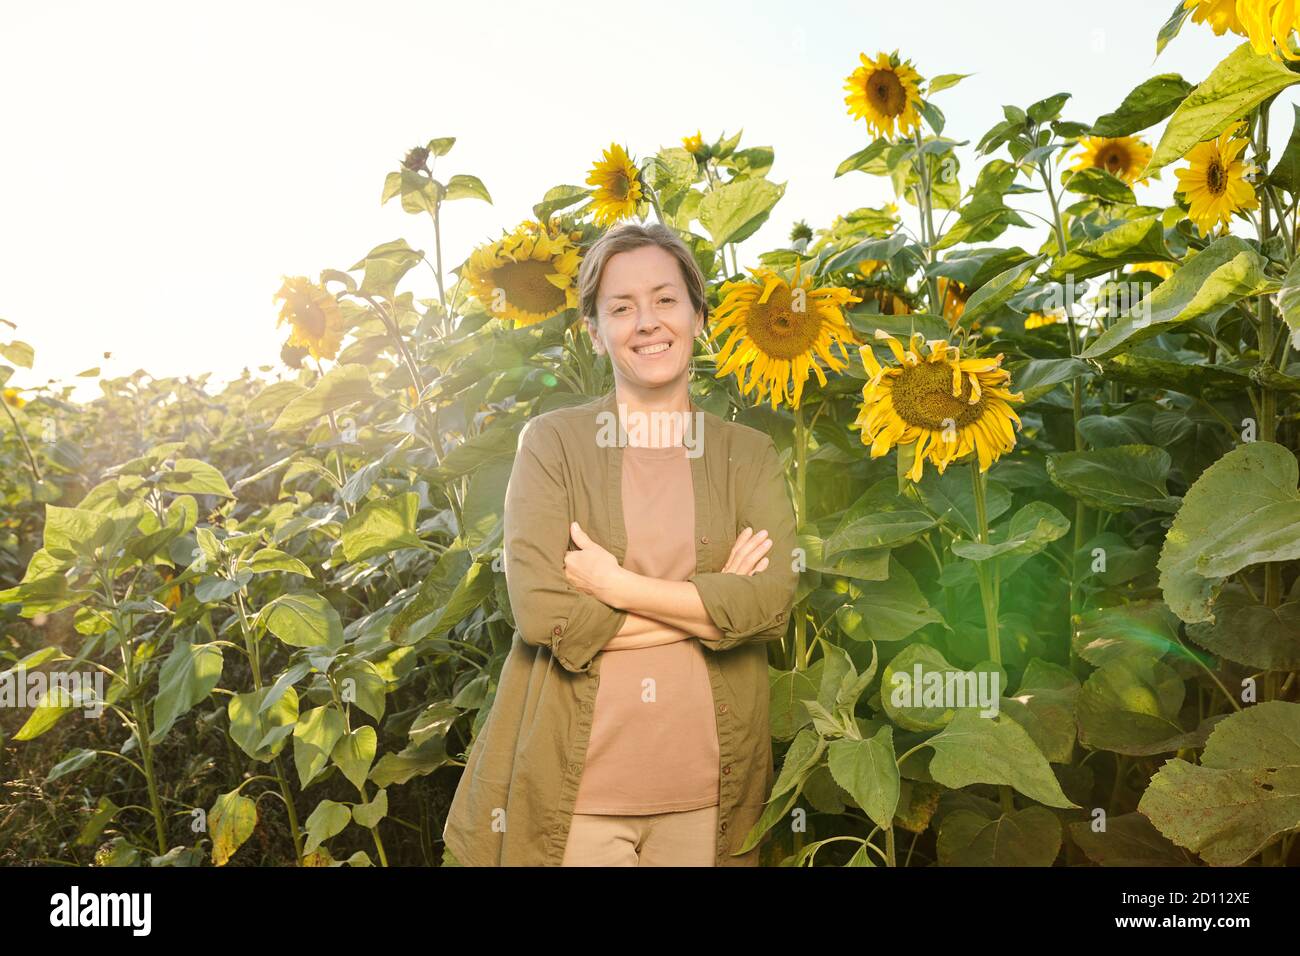 Happy mature woman in casualwear crossing her arms on chest among sunflowers Stock Photo